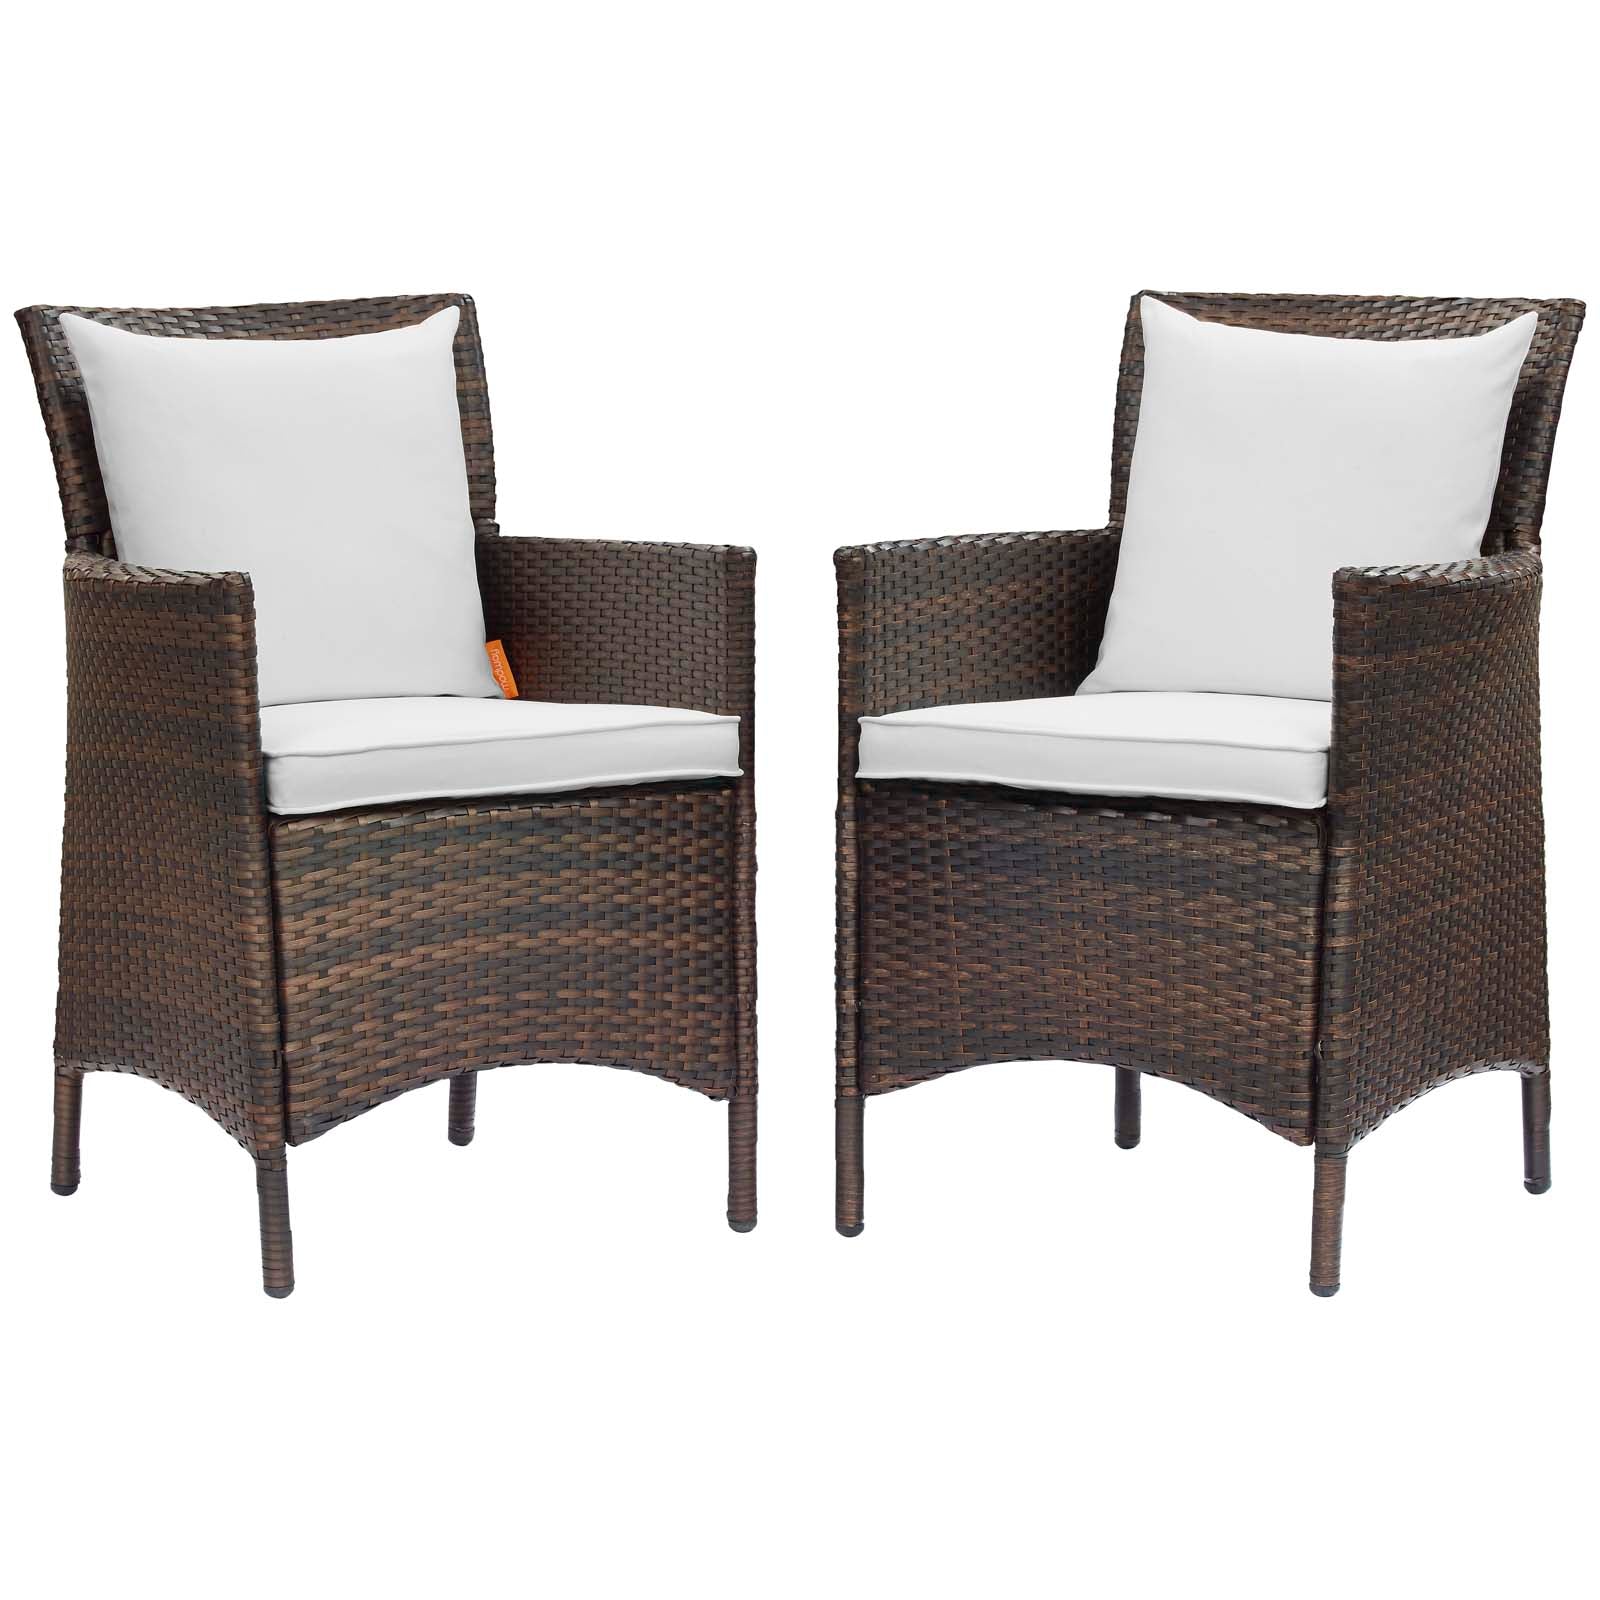 Modway Outdoor Dining Chairs - Conduit Outdoor Patio Wicker Rattan Dining Armchair Set of 2 Brown White